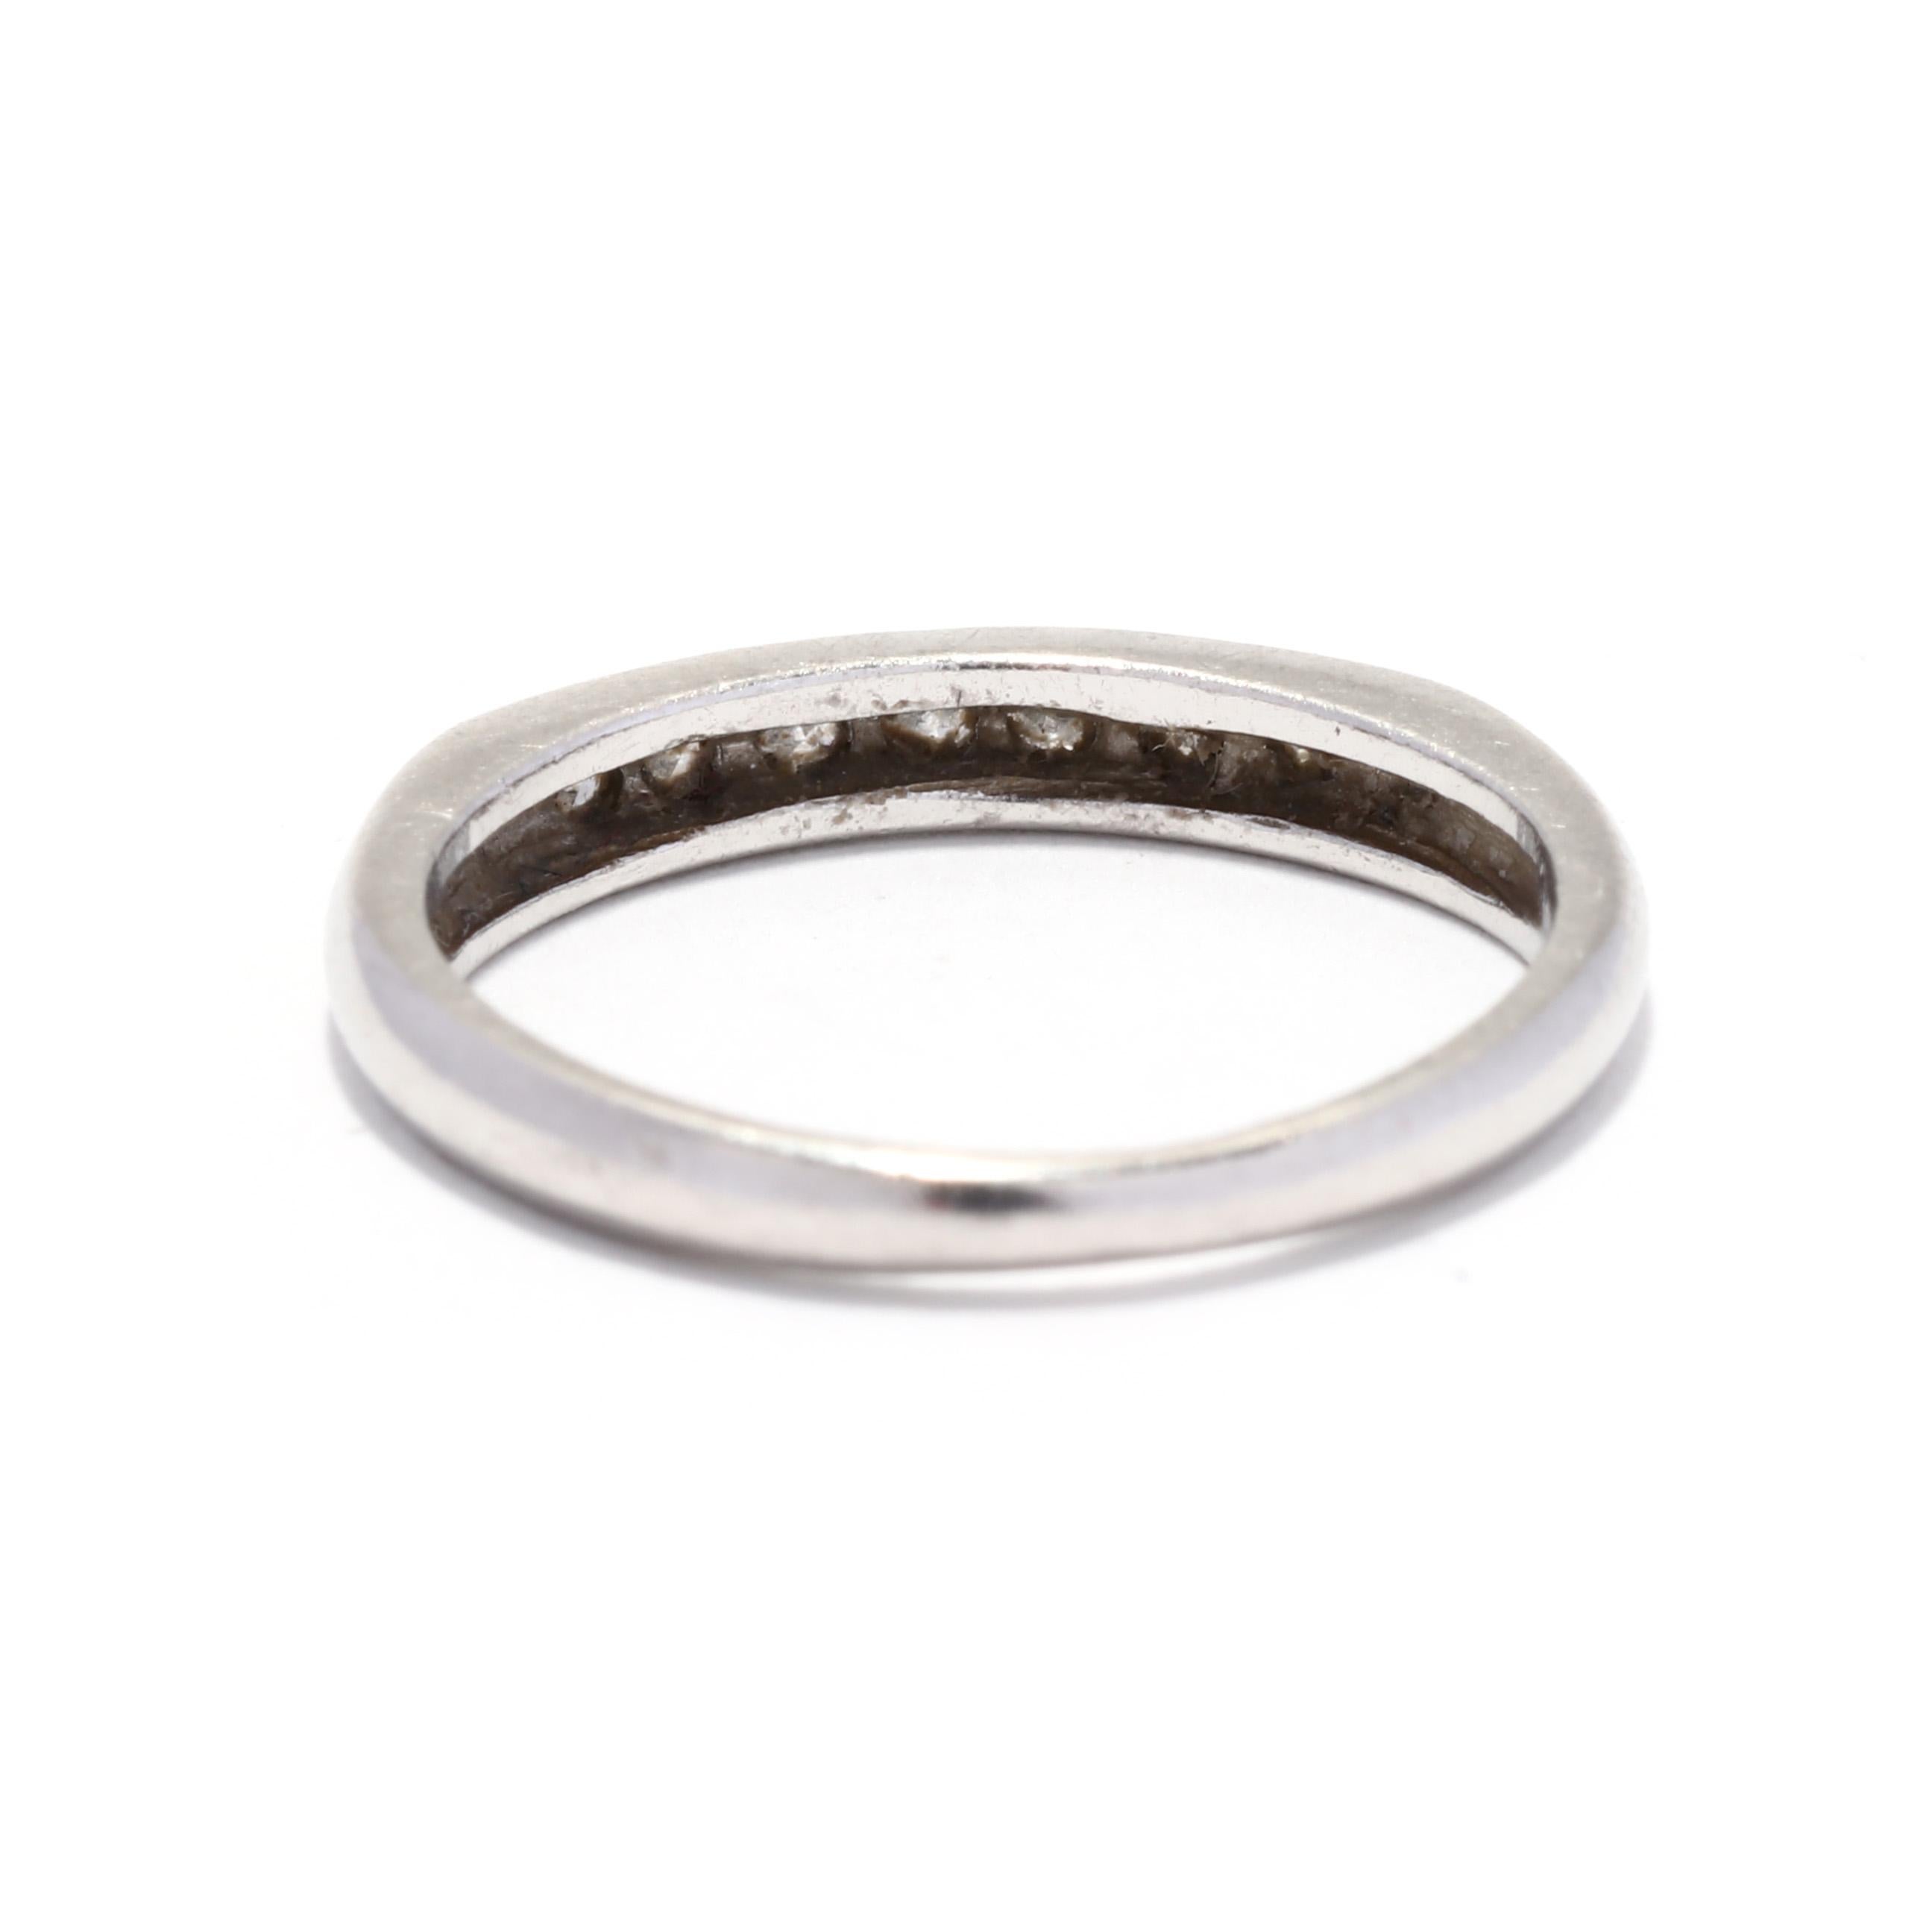 A vintage platinum and diamond wedding band. This stackable band features seven channel set single cut round diamonds weighing approximately .12 total carats and with a thin tapered band.

Stones:
- diamonds, 7 stones
- single cut round
- 1.75 mm
-